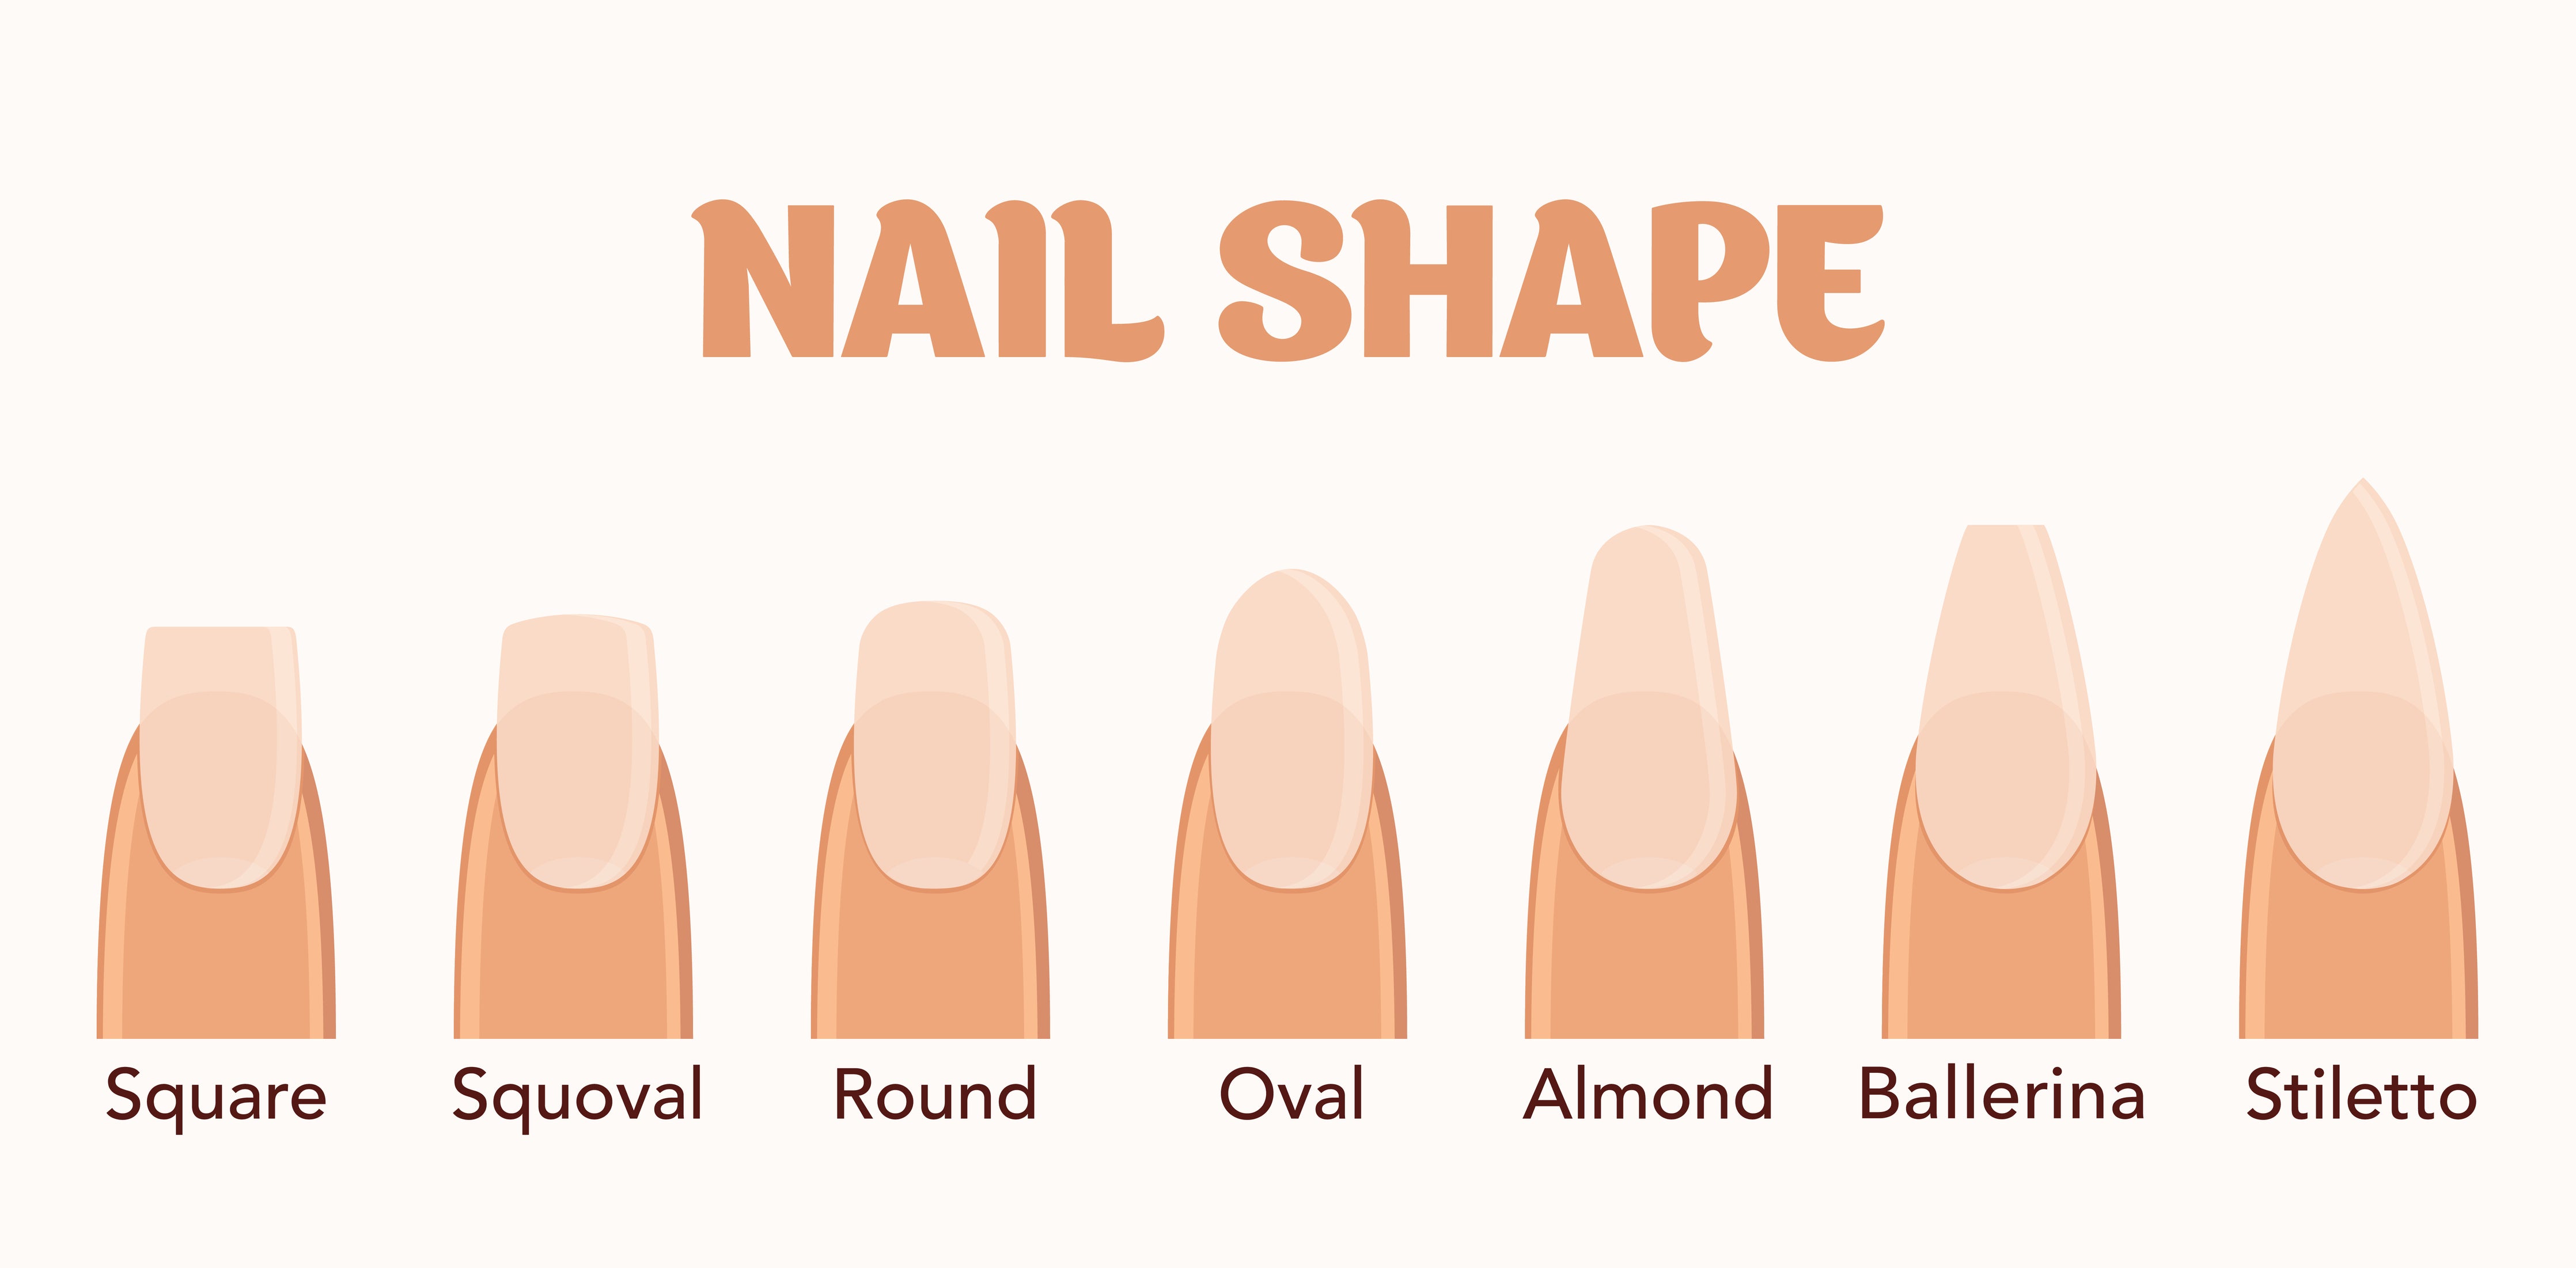 4. Short Almond Nail Shapes - wide 5